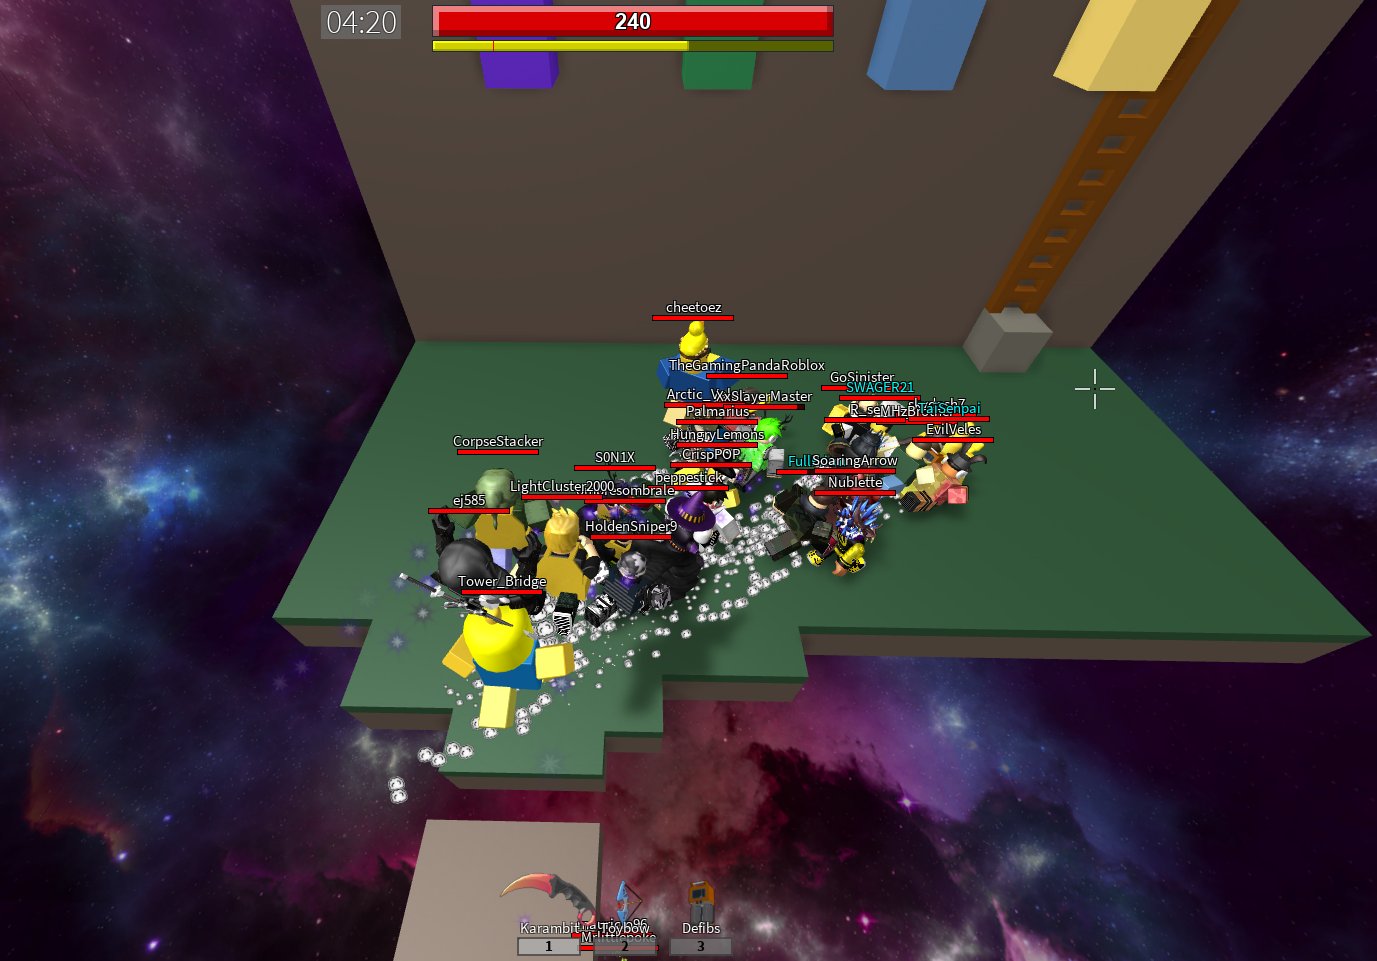 Placerebuilder On Twitter So Many Players On Debug Yesterday Xd R2da Robloxdev V100 - swager21 zerotwo roblox